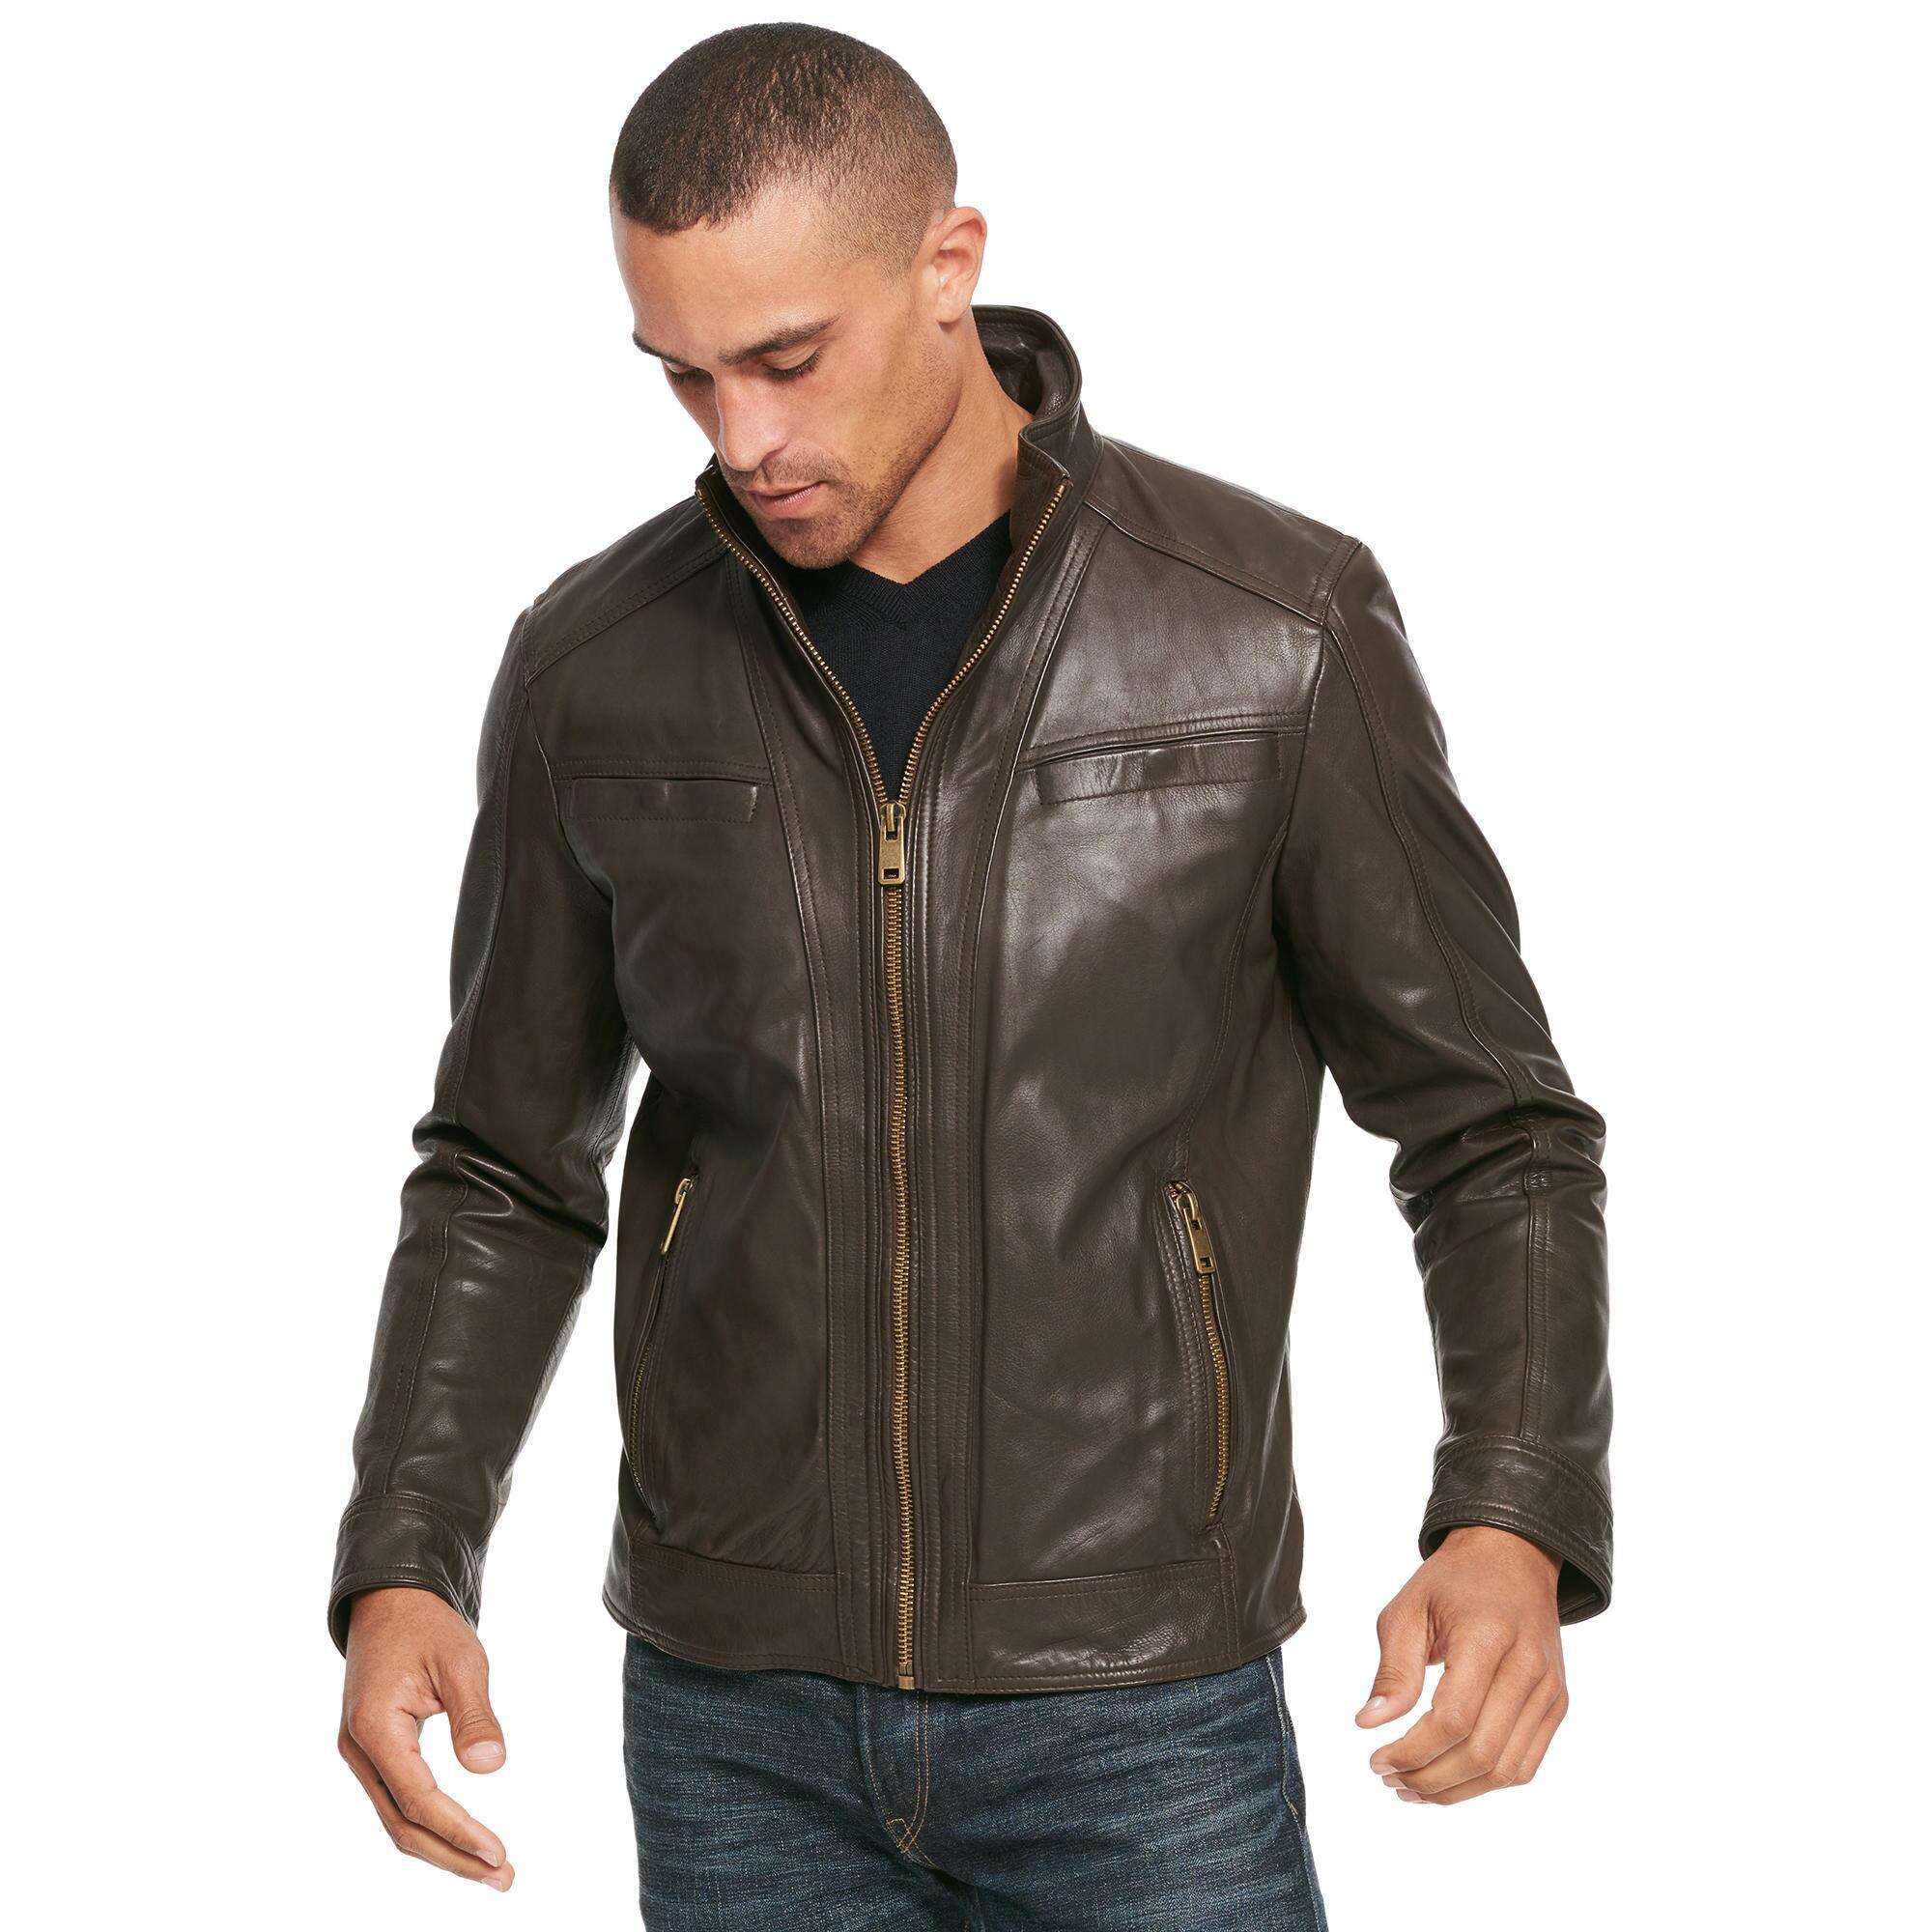 Lyst - Wilsons Leather Vintage Leather Jacket With Seam Detail in Brown